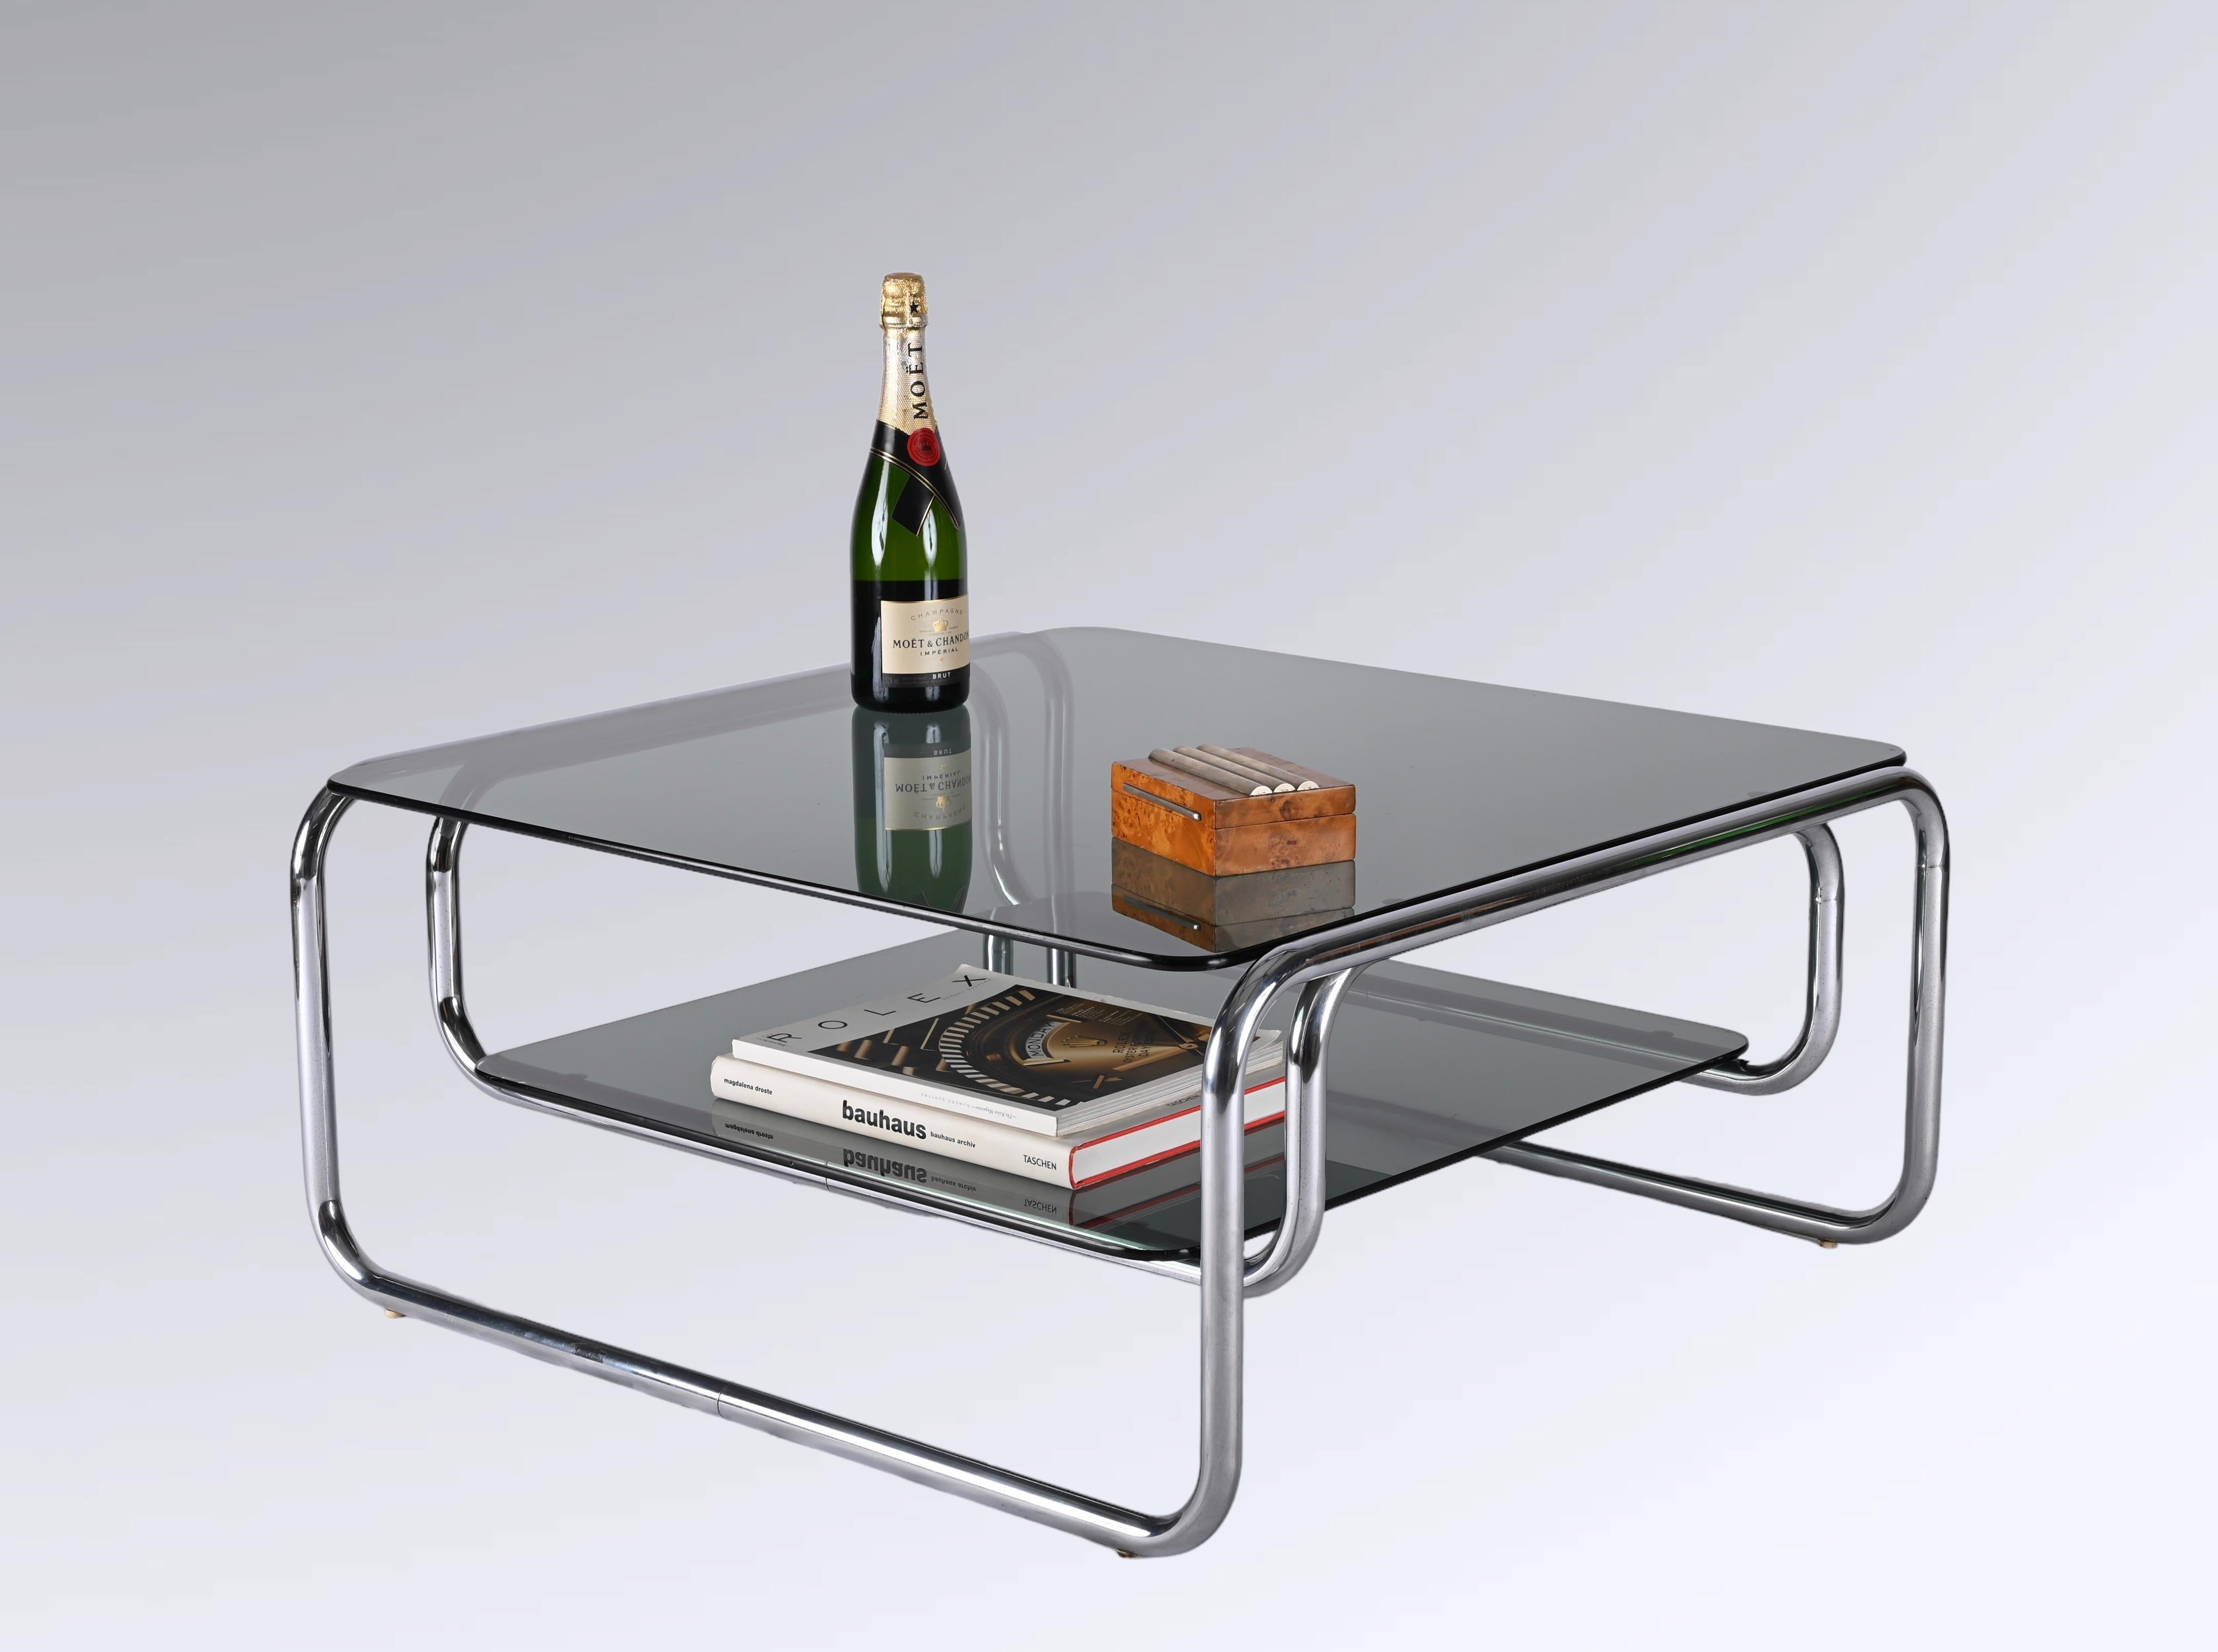 Astonishing double-tiered coffee table in chromed steel with thick smoked glasses. Gianfranco Frattini probably designed this fantastic piece in Italy during the 1970s.

The contrast between the straight lines of the smoked glasses and the curved